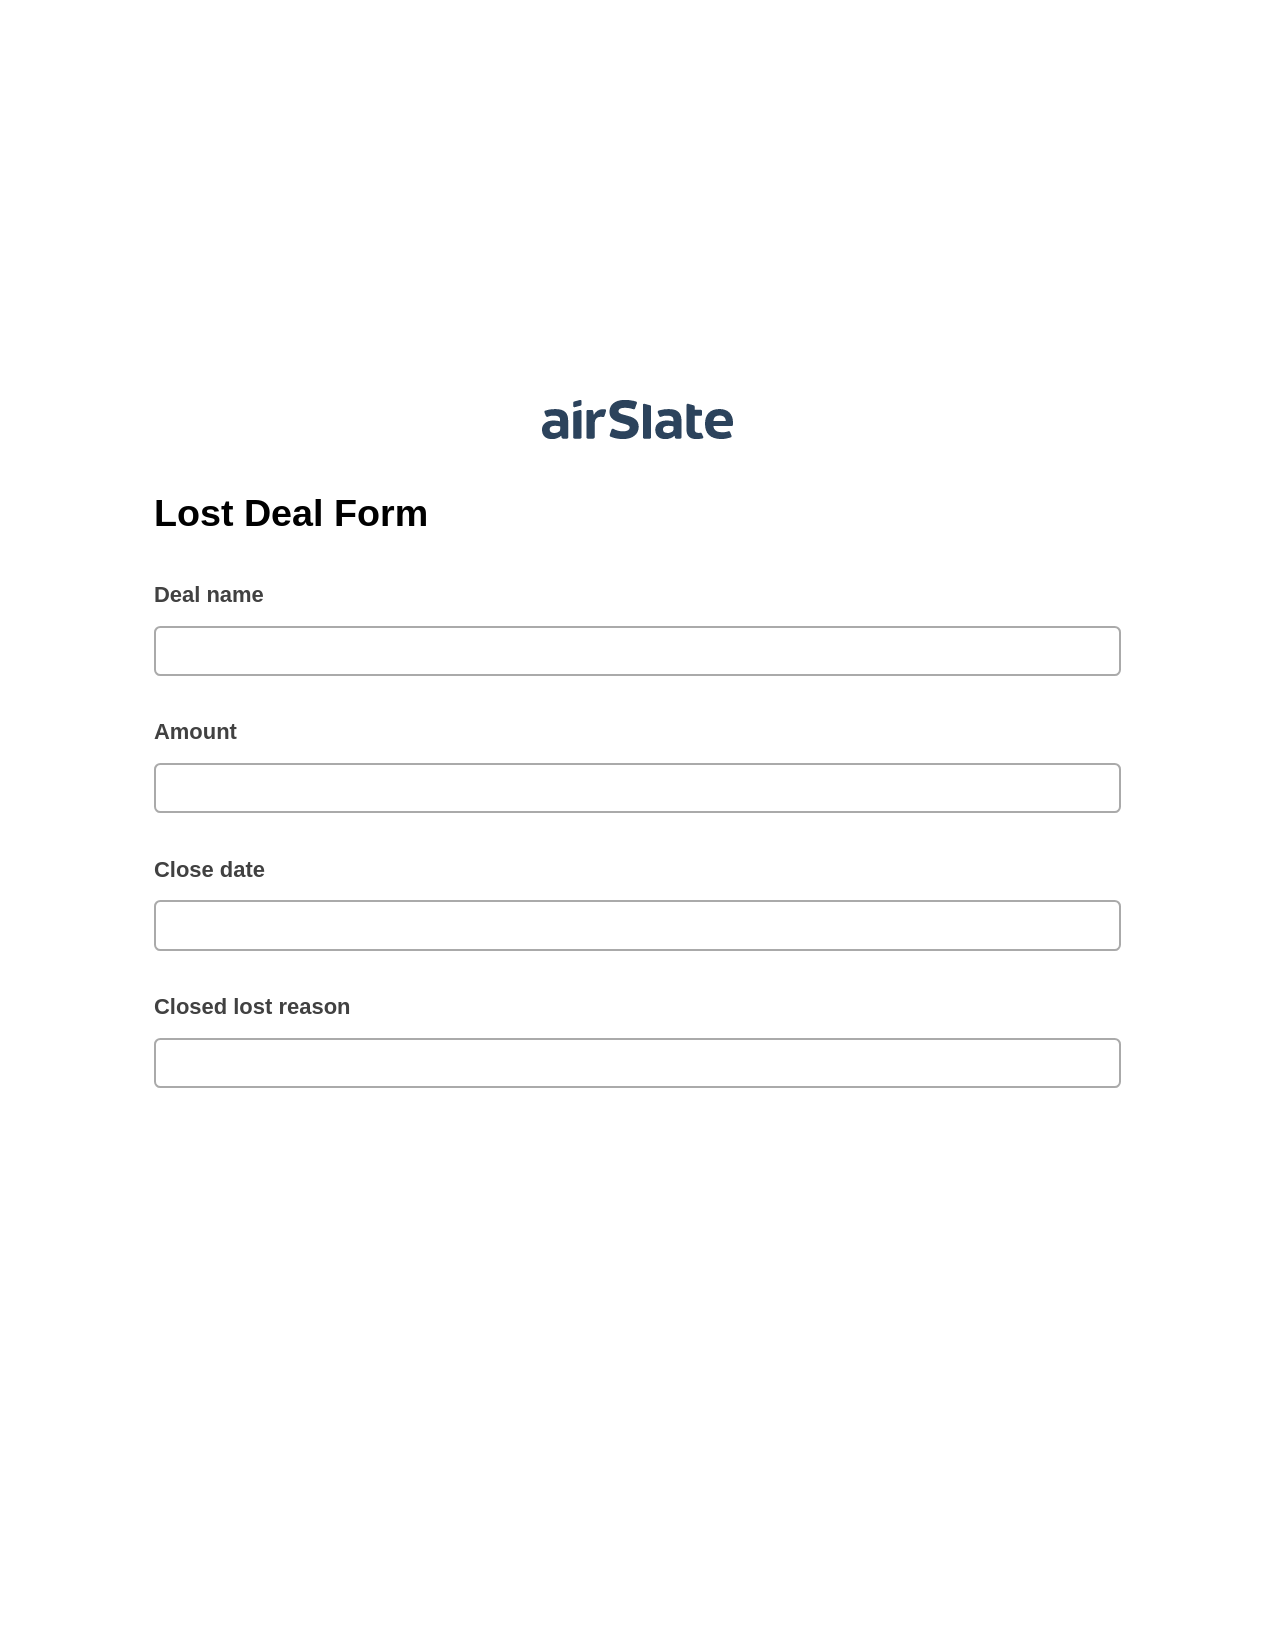 Multirole Lost Deal Form Pre-fill from CSV File Bot, Remove Tags From Slate Bot, Archive to OneDrive Bot